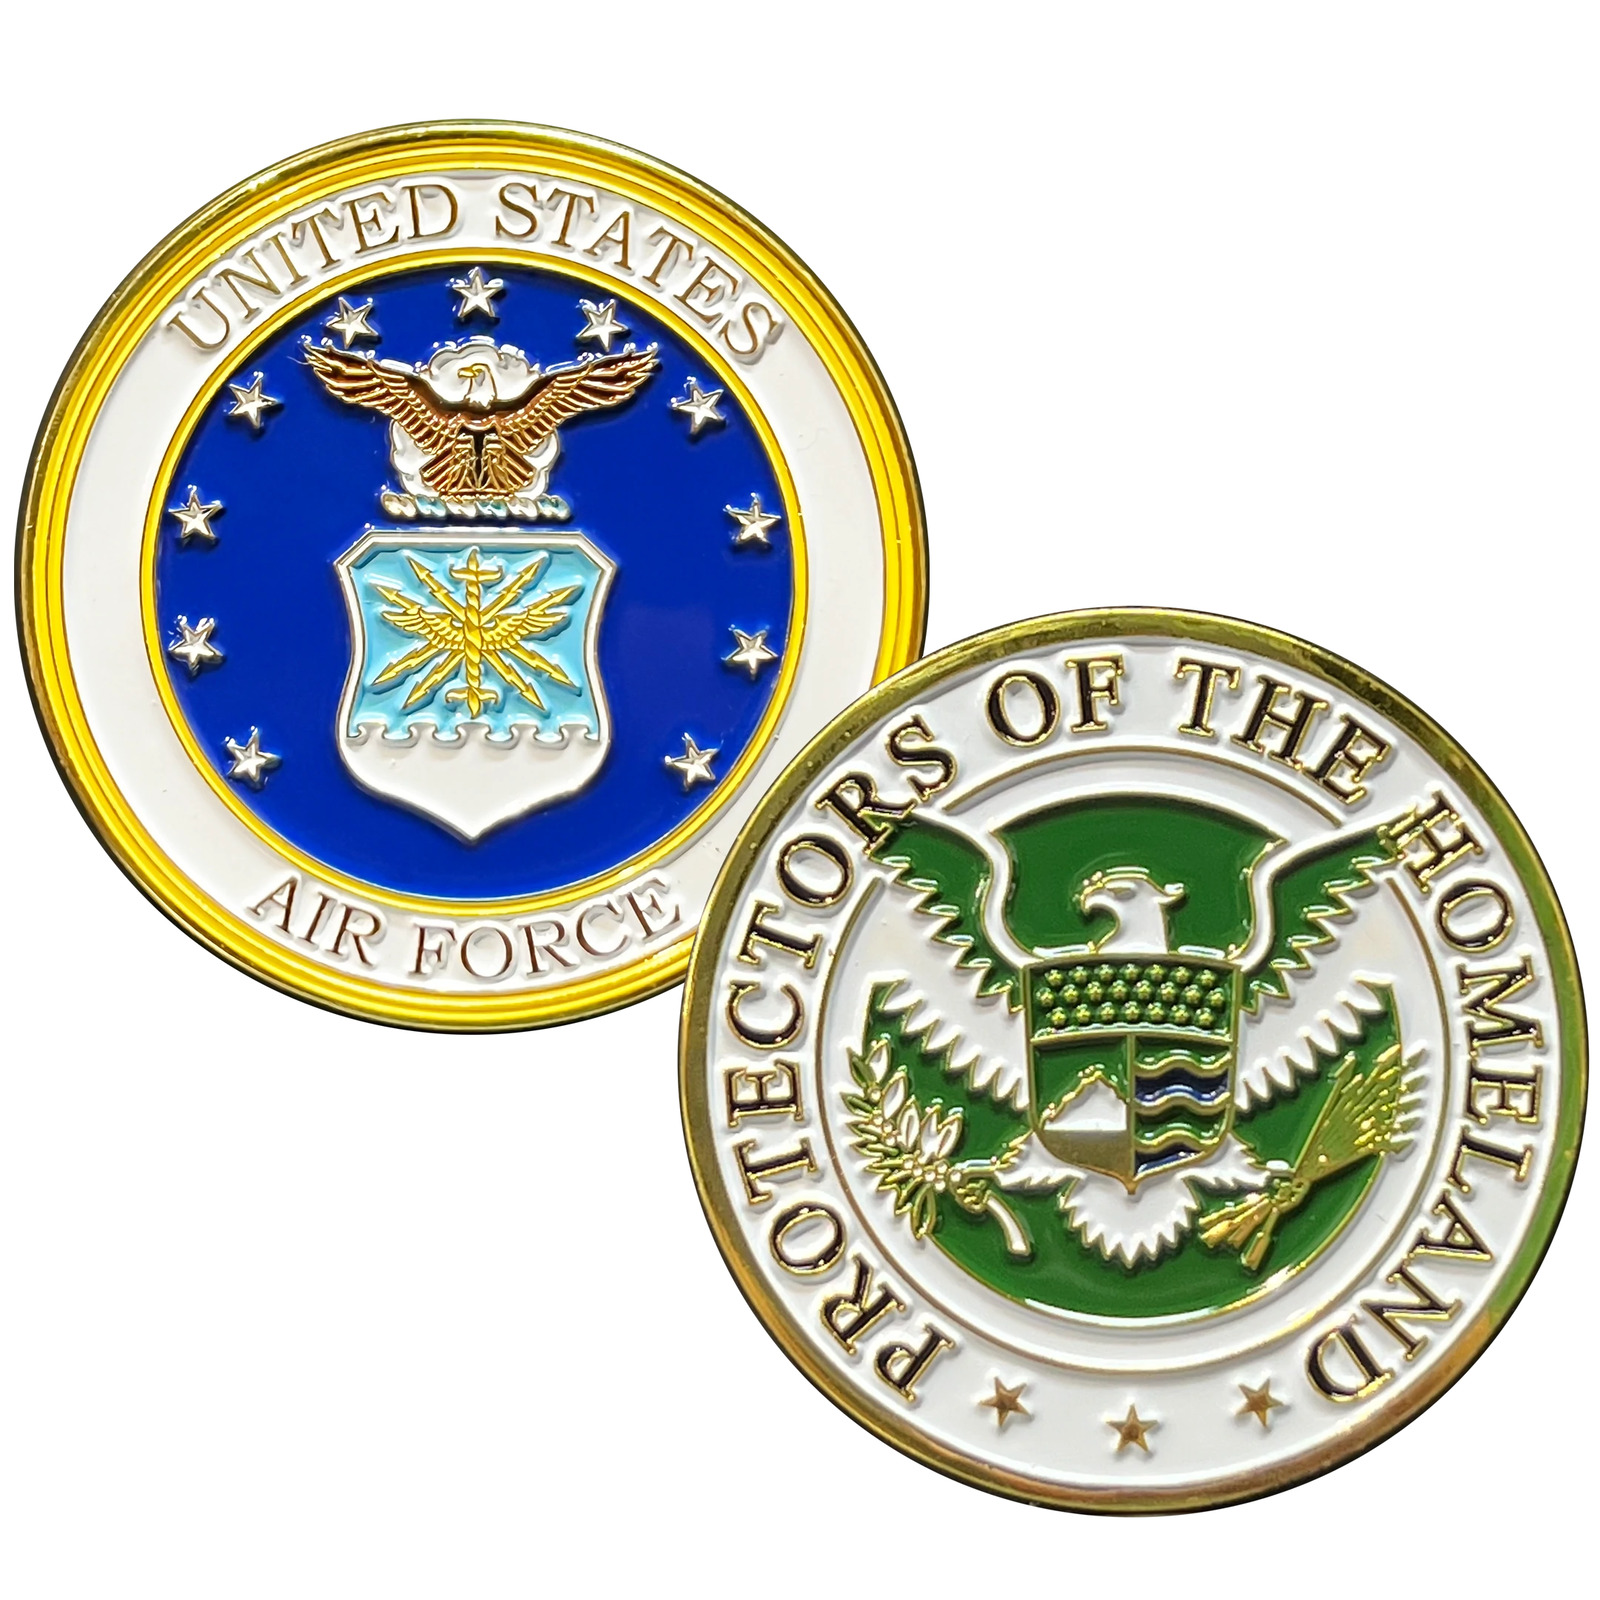 GL3-009 Protectors of the Homeland CBP HSI FAM Secret Service US Air Force Chall